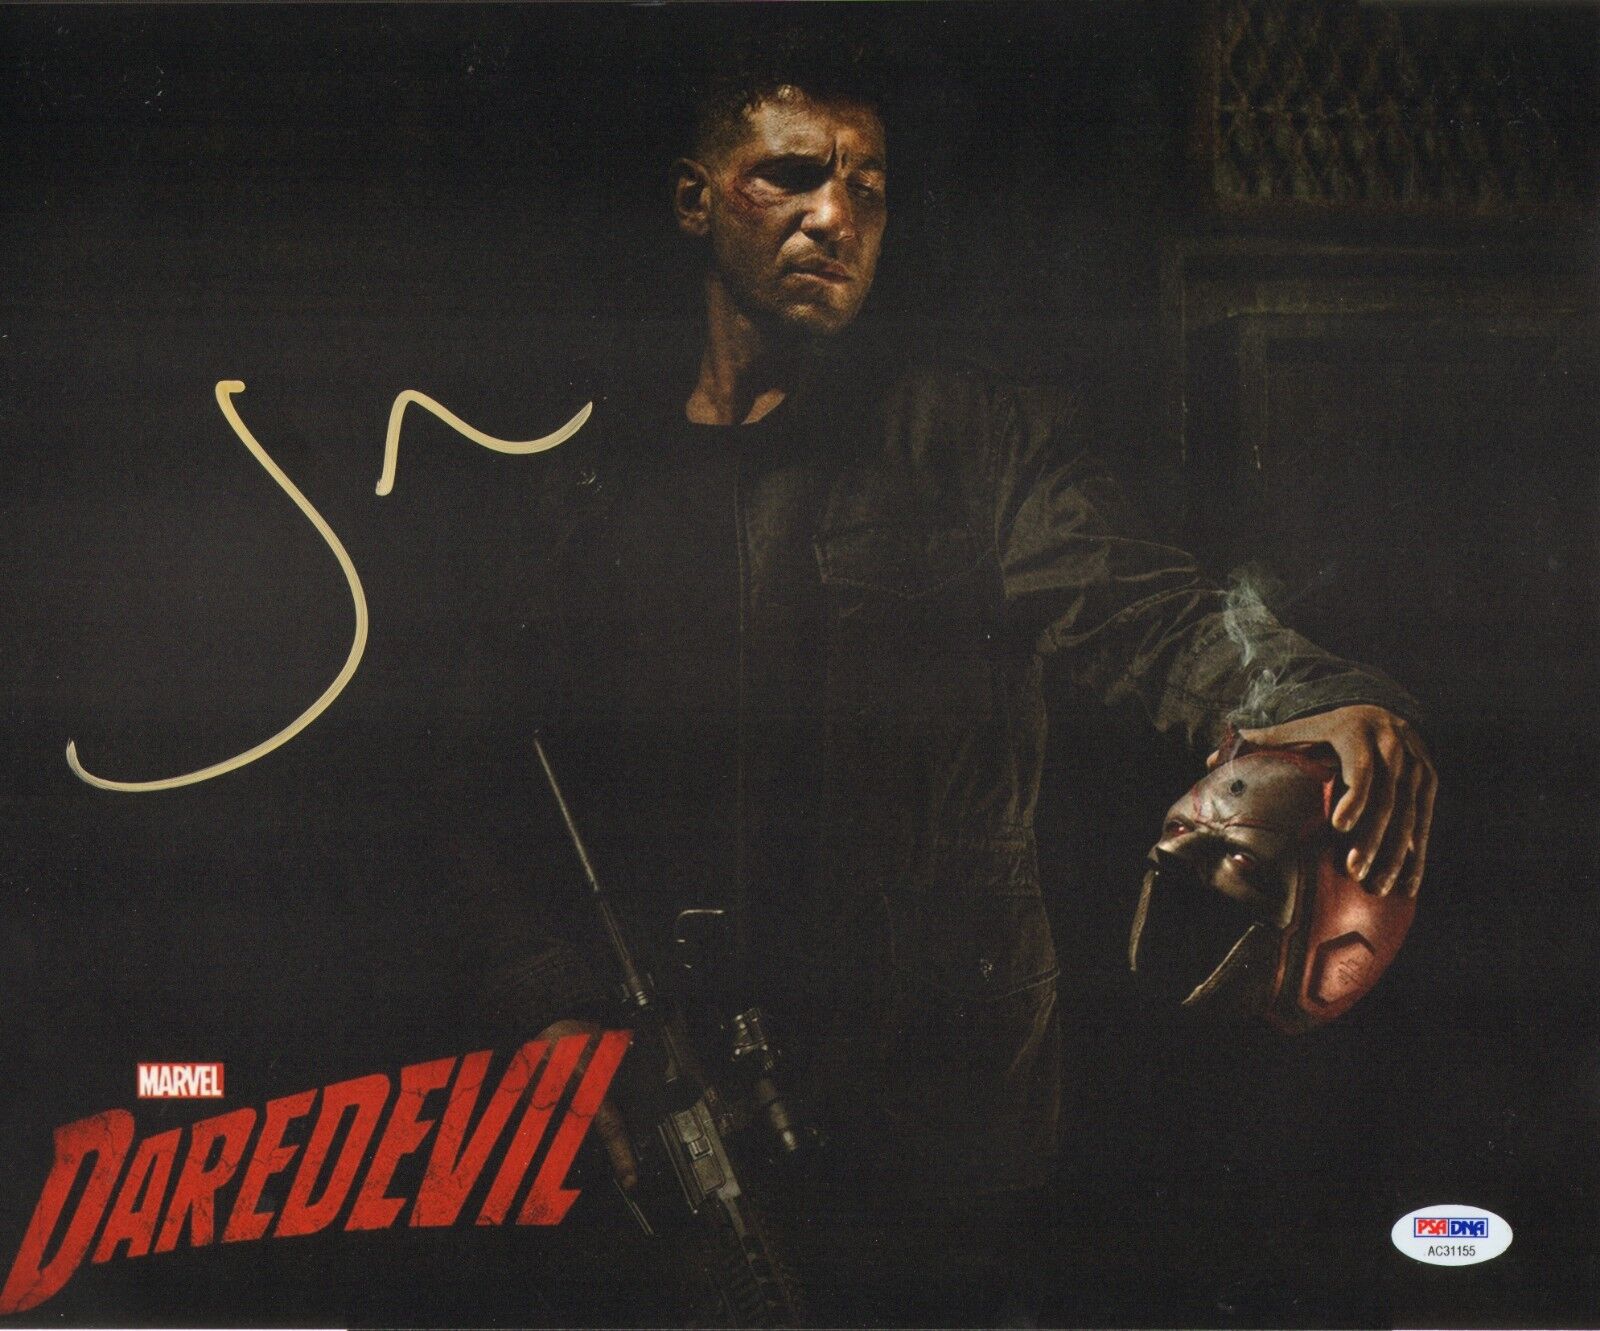 Jon Bernthal Signed 11x14 Photo Poster painting PSA/DNA Daredevil The Punisher Picture Autograph